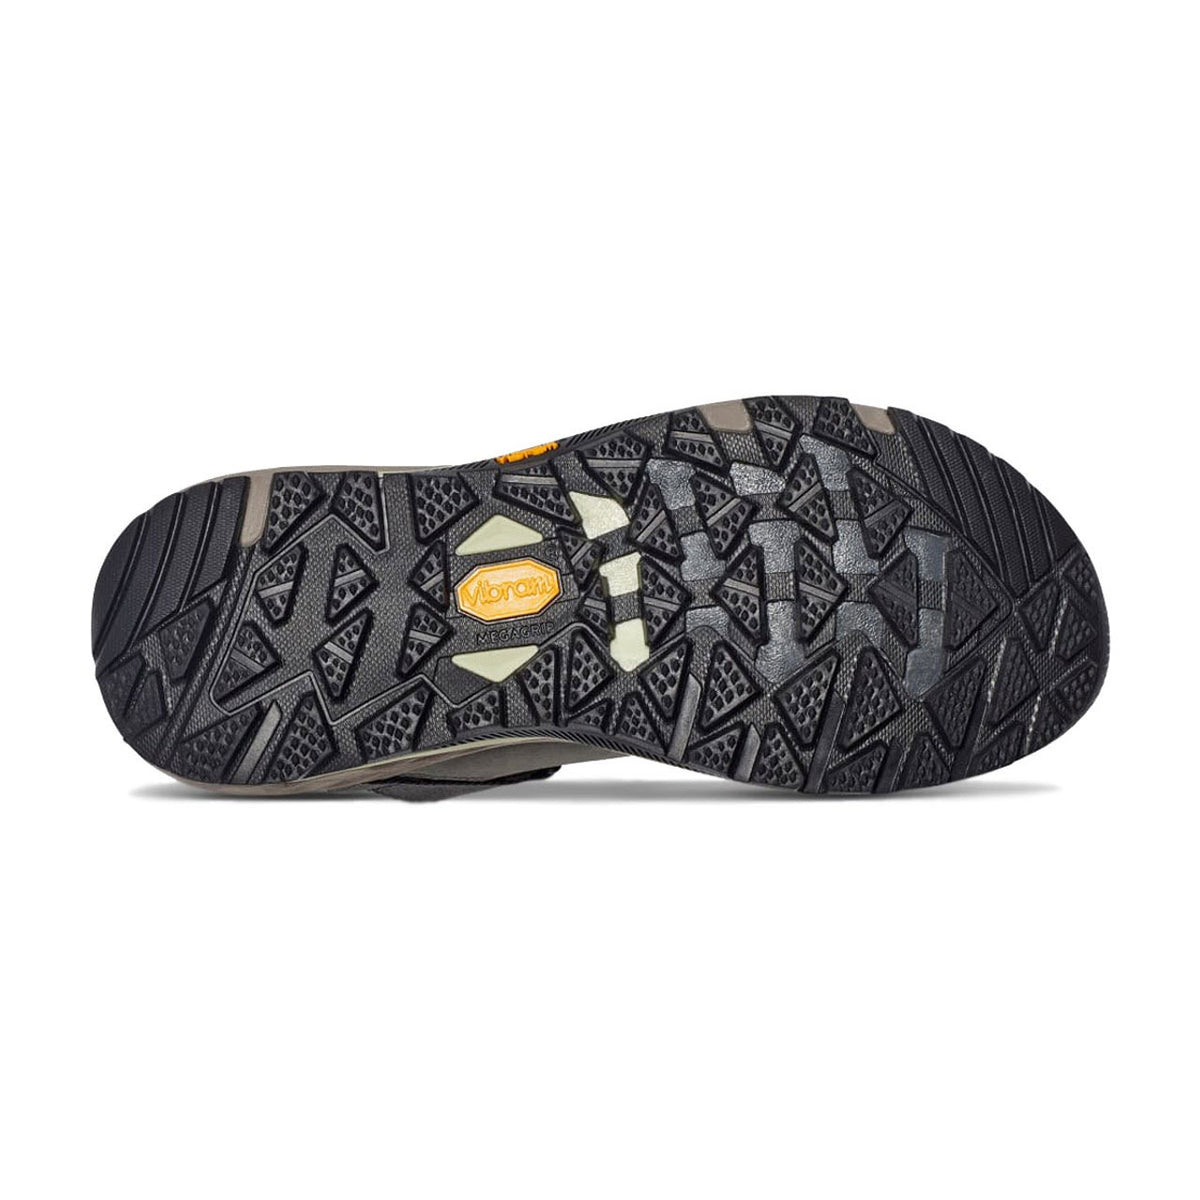 Bottom view of a TEVA GRANDVIEW GTX LOW BRACKEN/BURLWOOD - WOMENS hiking shoe sole featuring a detailed black tread pattern with triangular shapes and a branded yellow logo in the waterproof women&#39;s hiker.